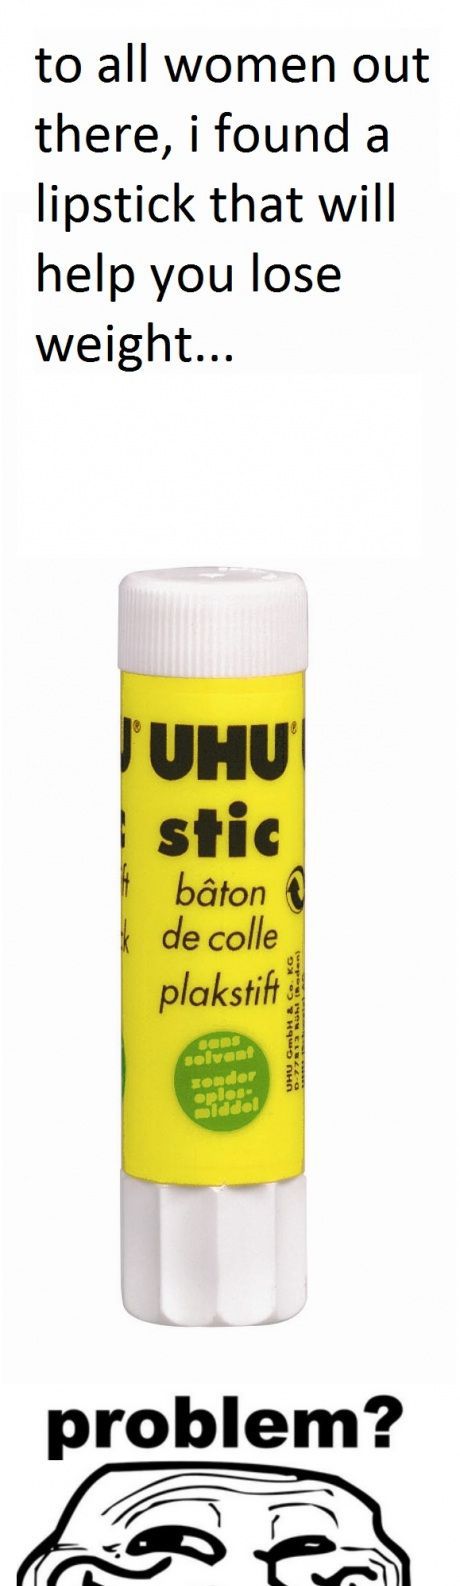 troll face - to all women out there, i found a lipstick that will help you lose weight... Tuhu stic bton de colle plakstift Uhu GmbH sender problem?